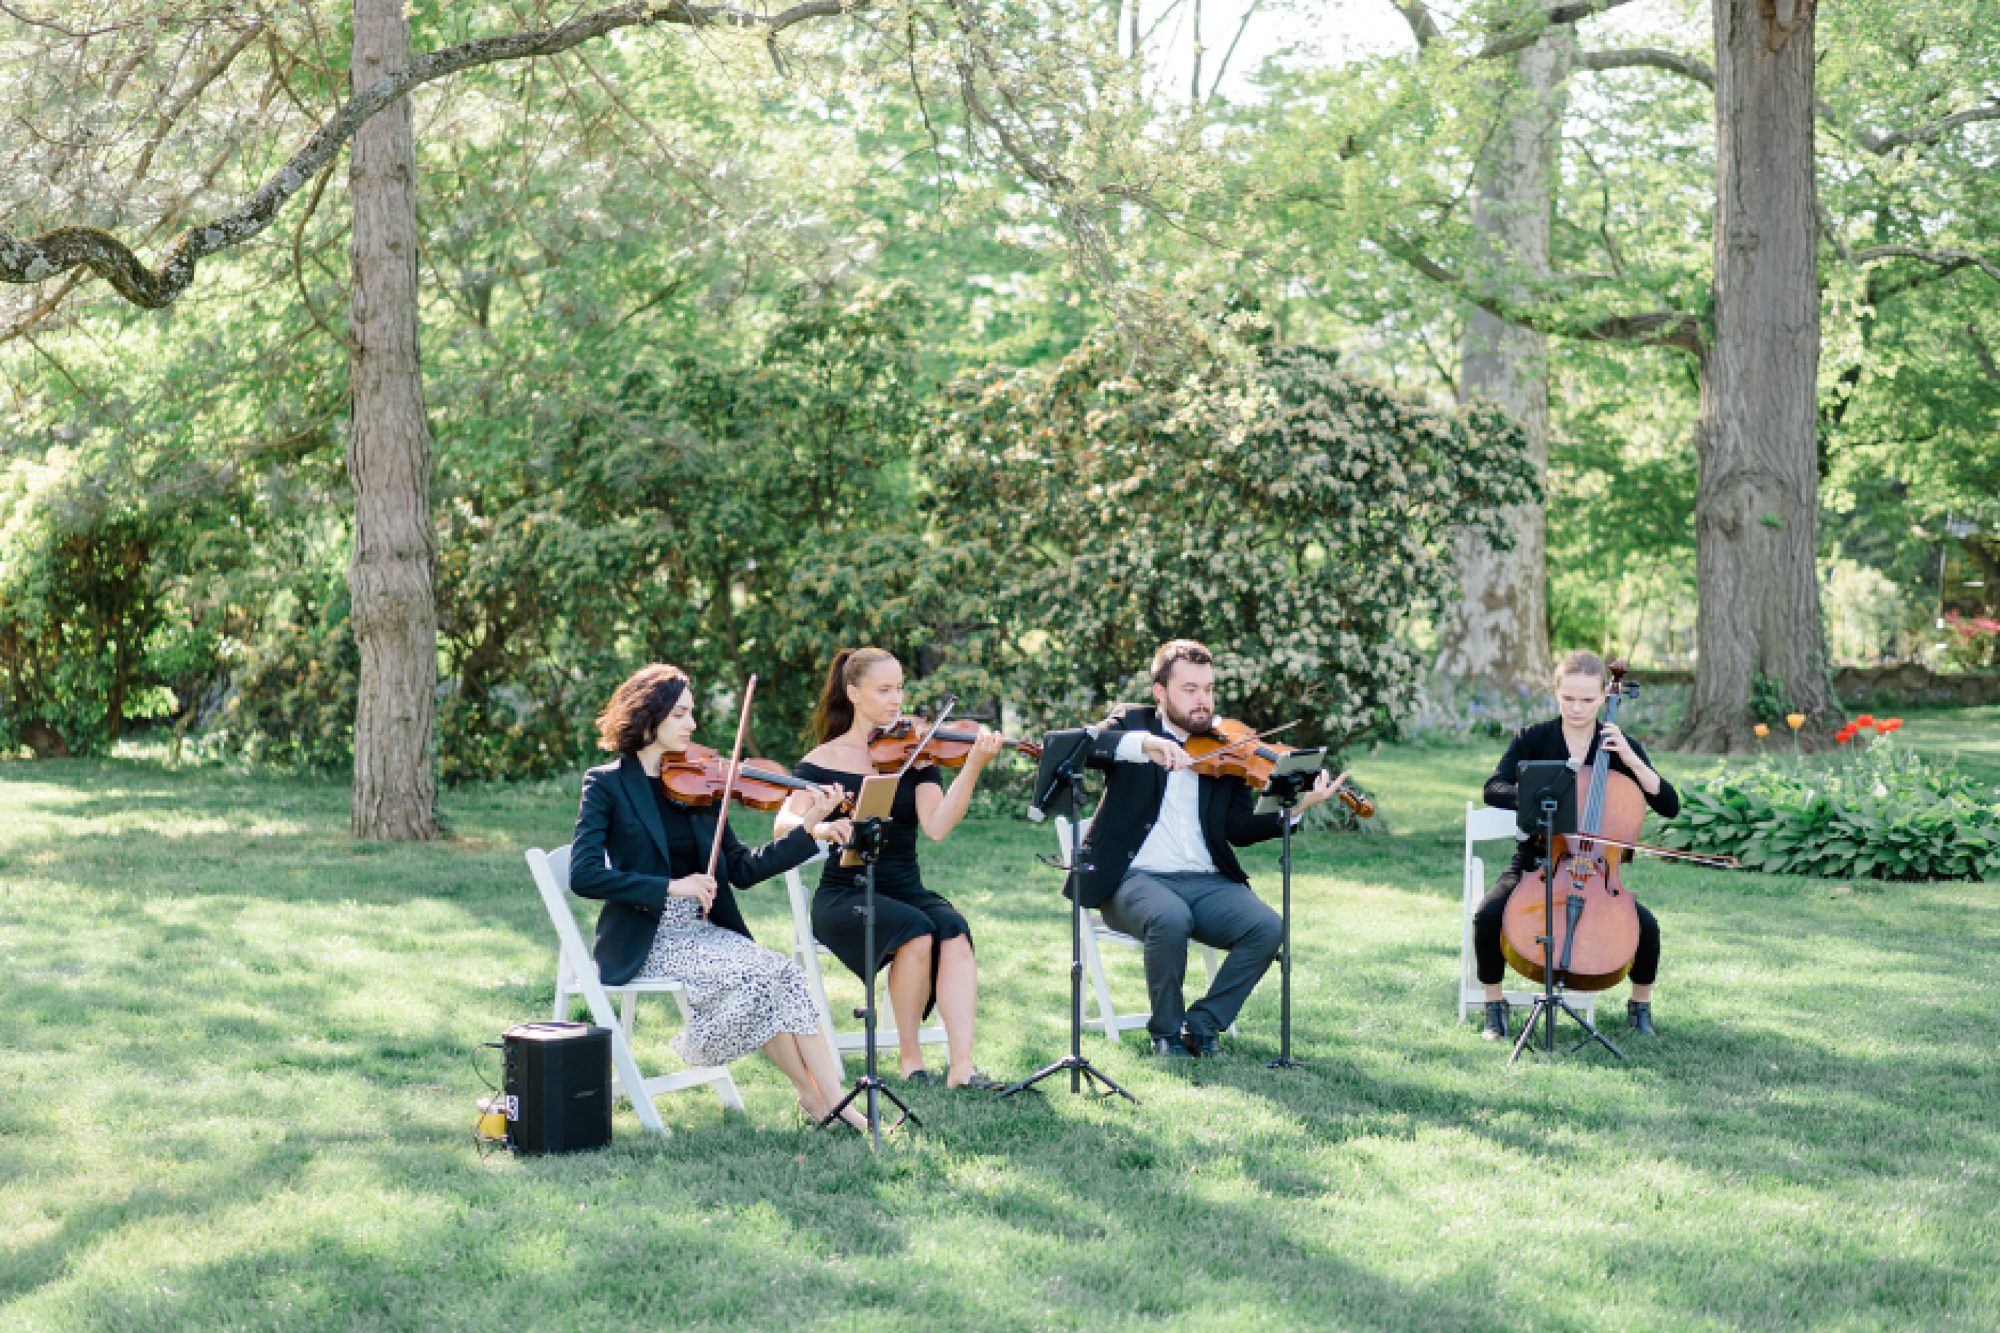 stringed band plays during Chic Garden Wedding at Glen Foerd on the Delaware